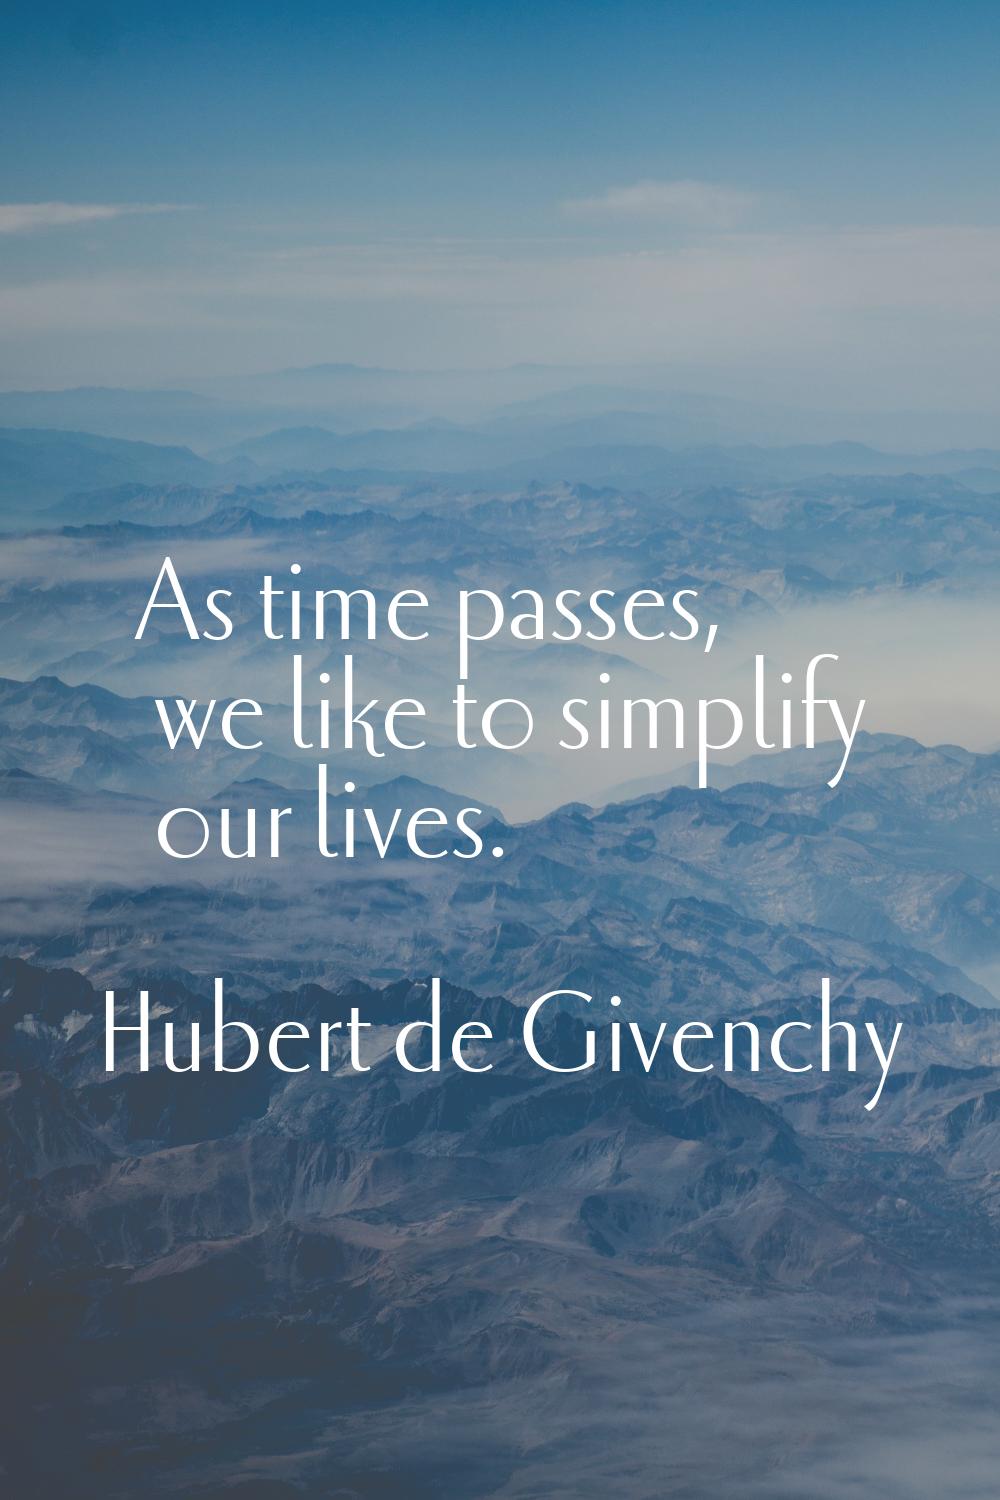 As time passes, we like to simplify our lives.